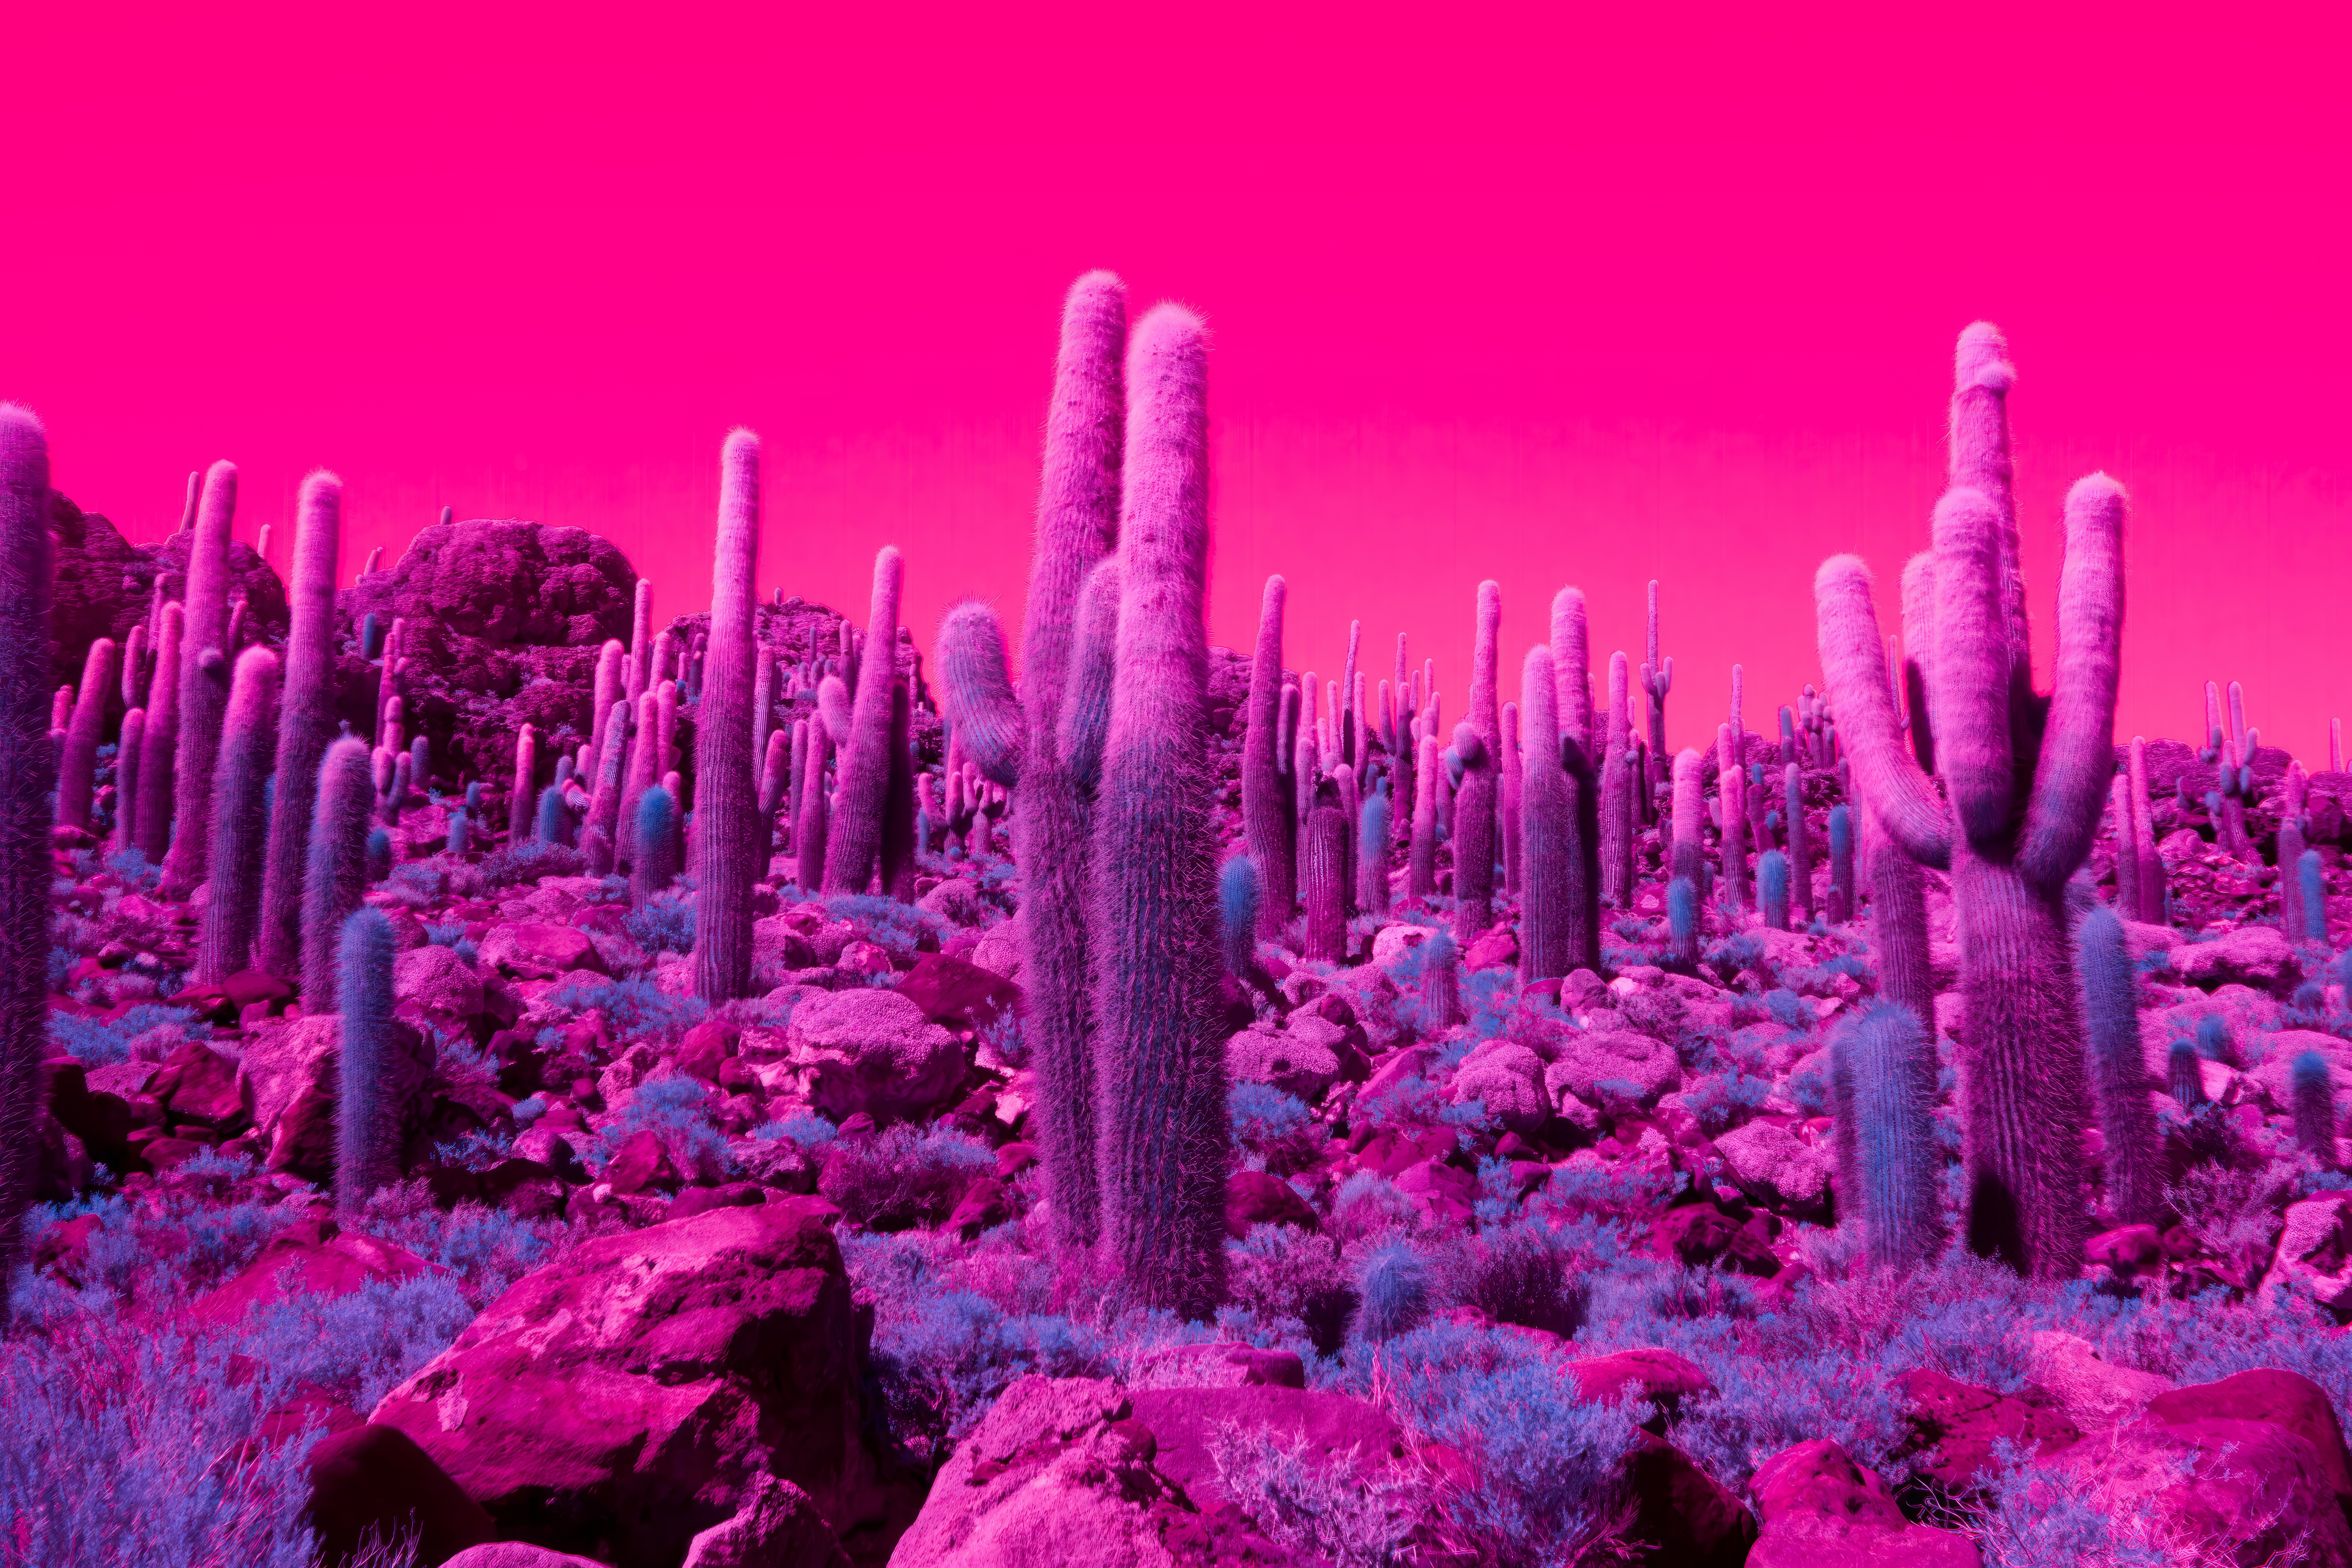 Cactus Desert Surreal Infrared Pink Plants Bright Blue Stones 5000x3334